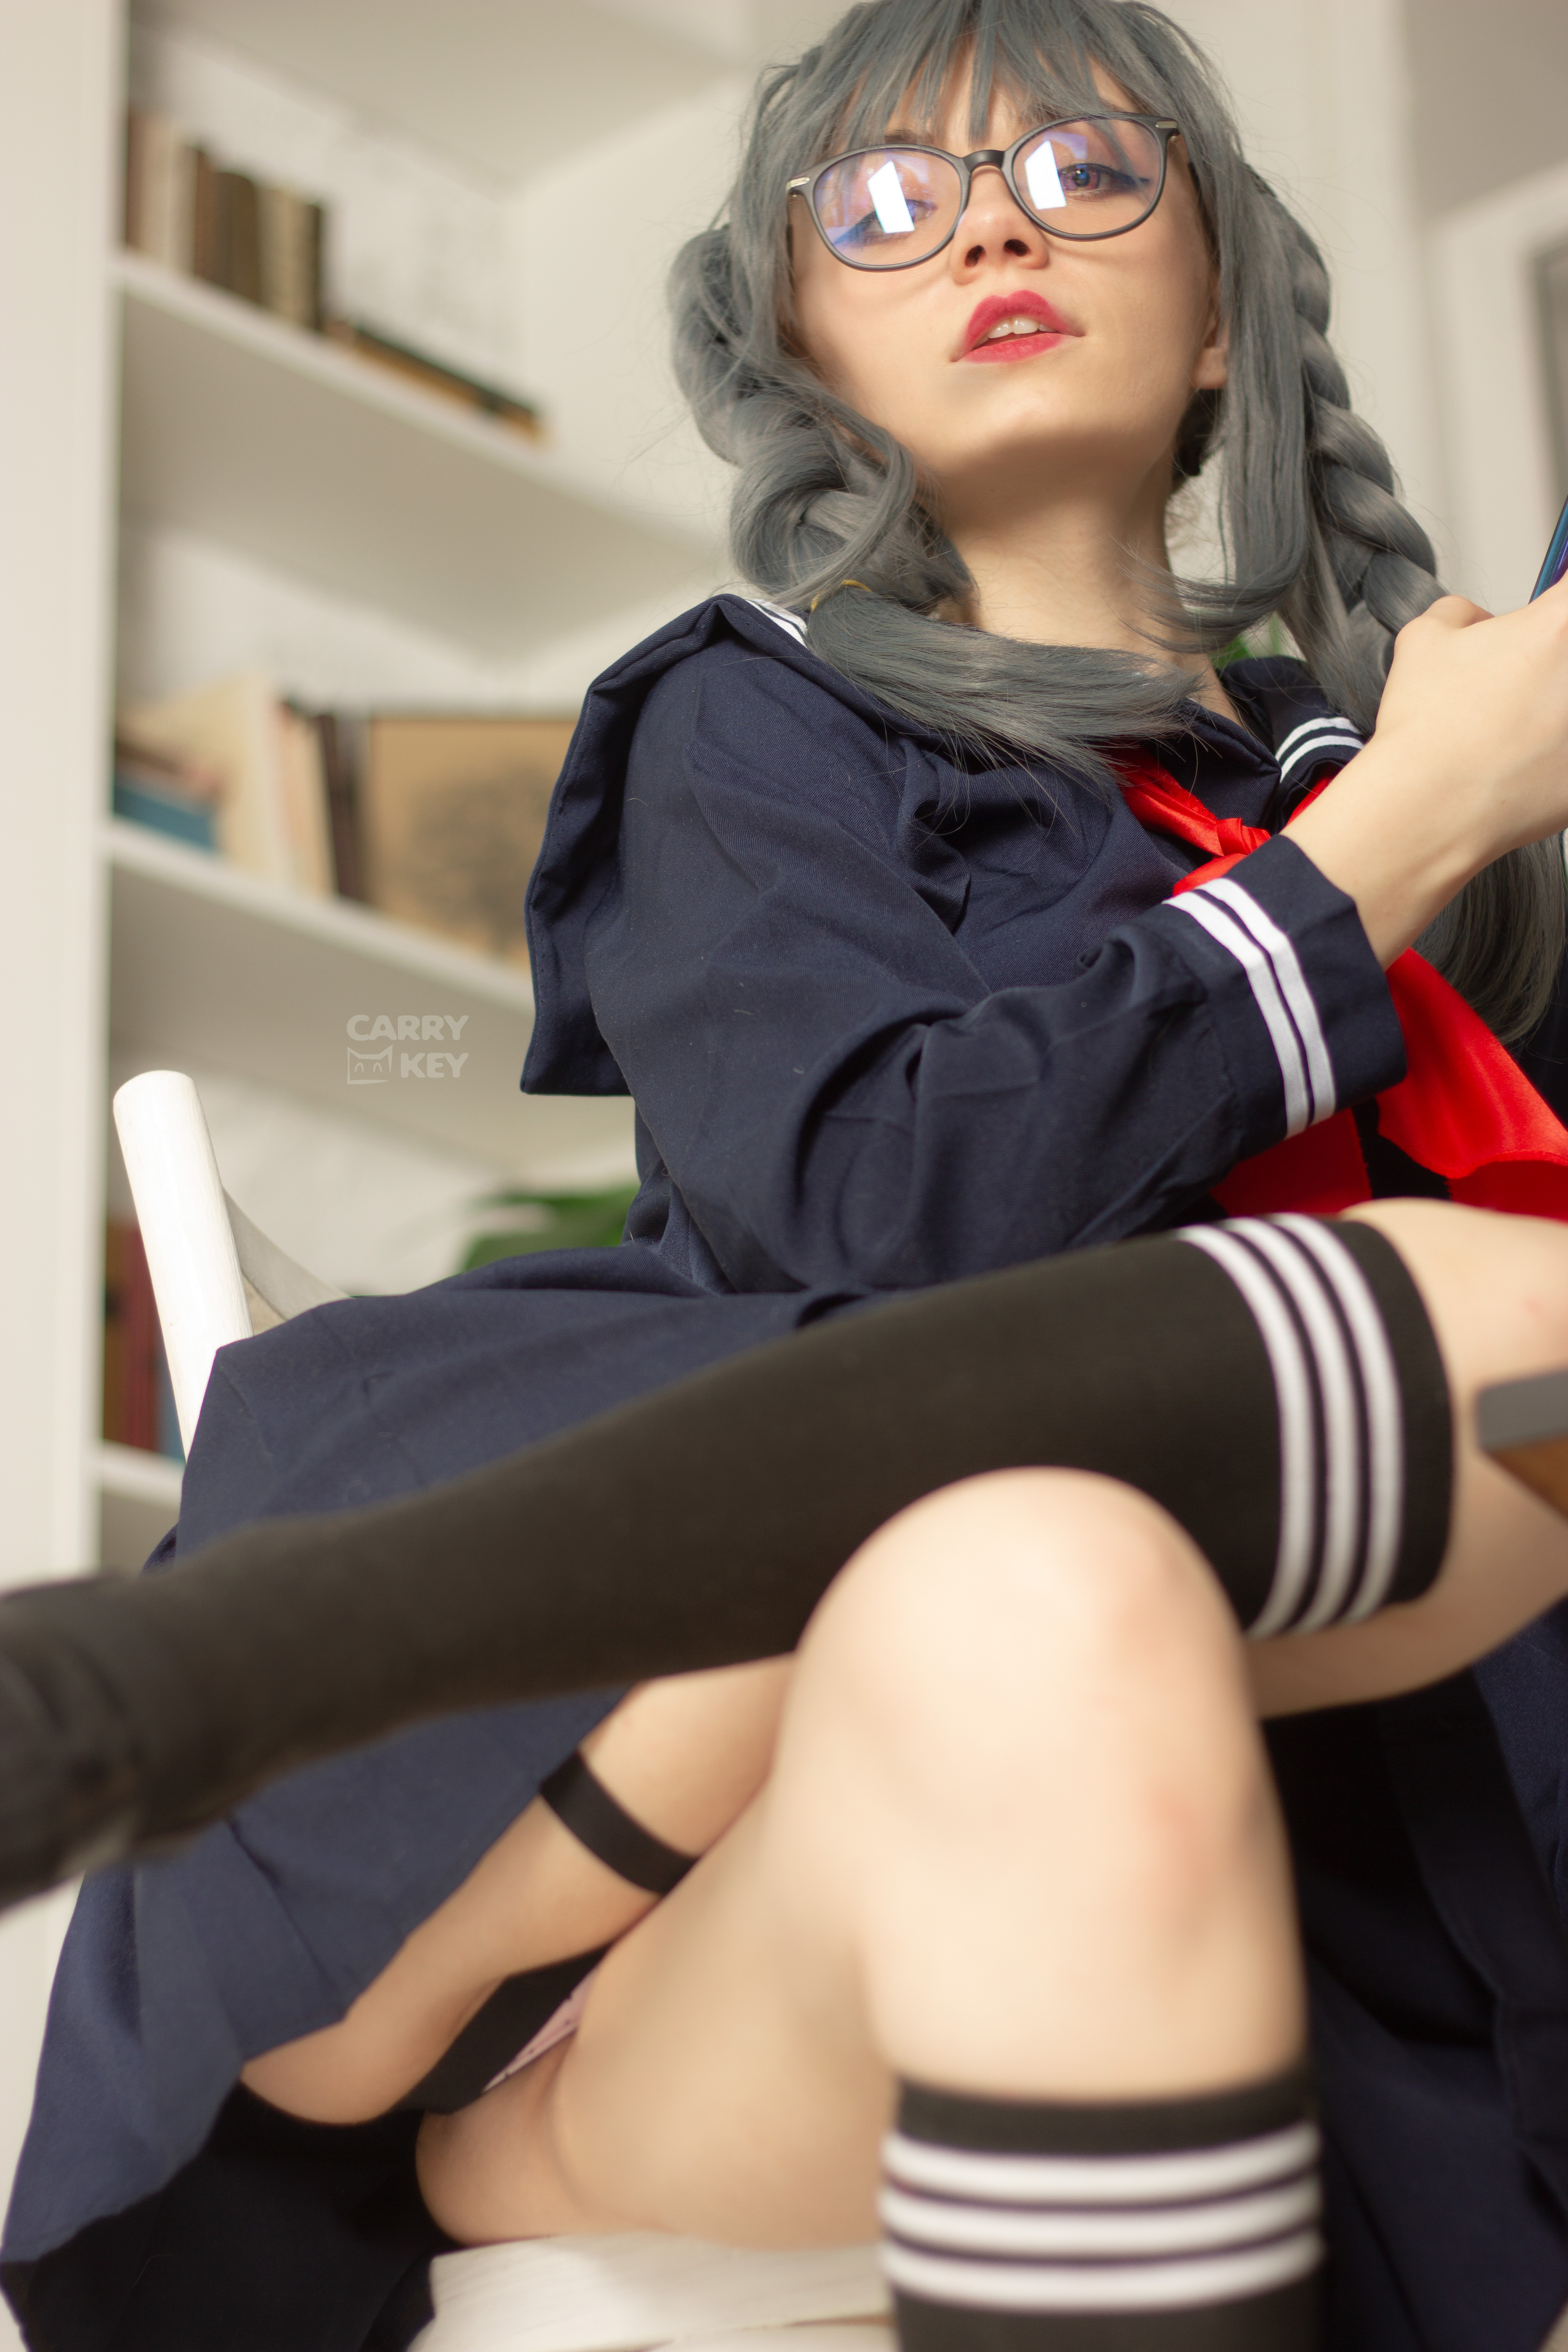 High School Girls - Lewd Japanese high school girl ;) Wanna some special classes? [self] Porn  Pic - EPORNER